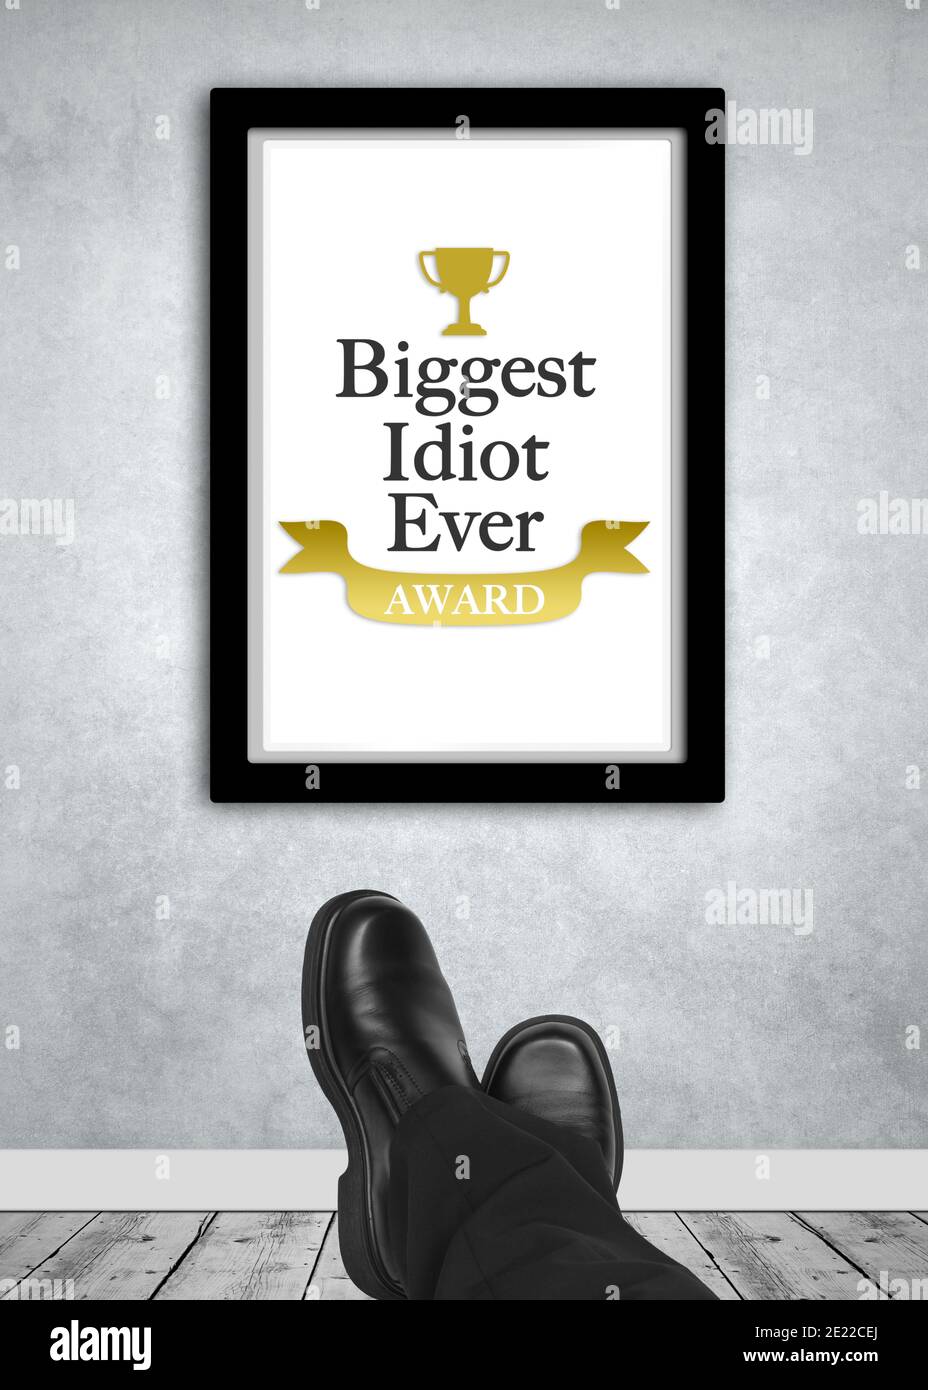 Biggest idiot ever award frame on wall with relaxing business man shoes in foreground Stock Photo